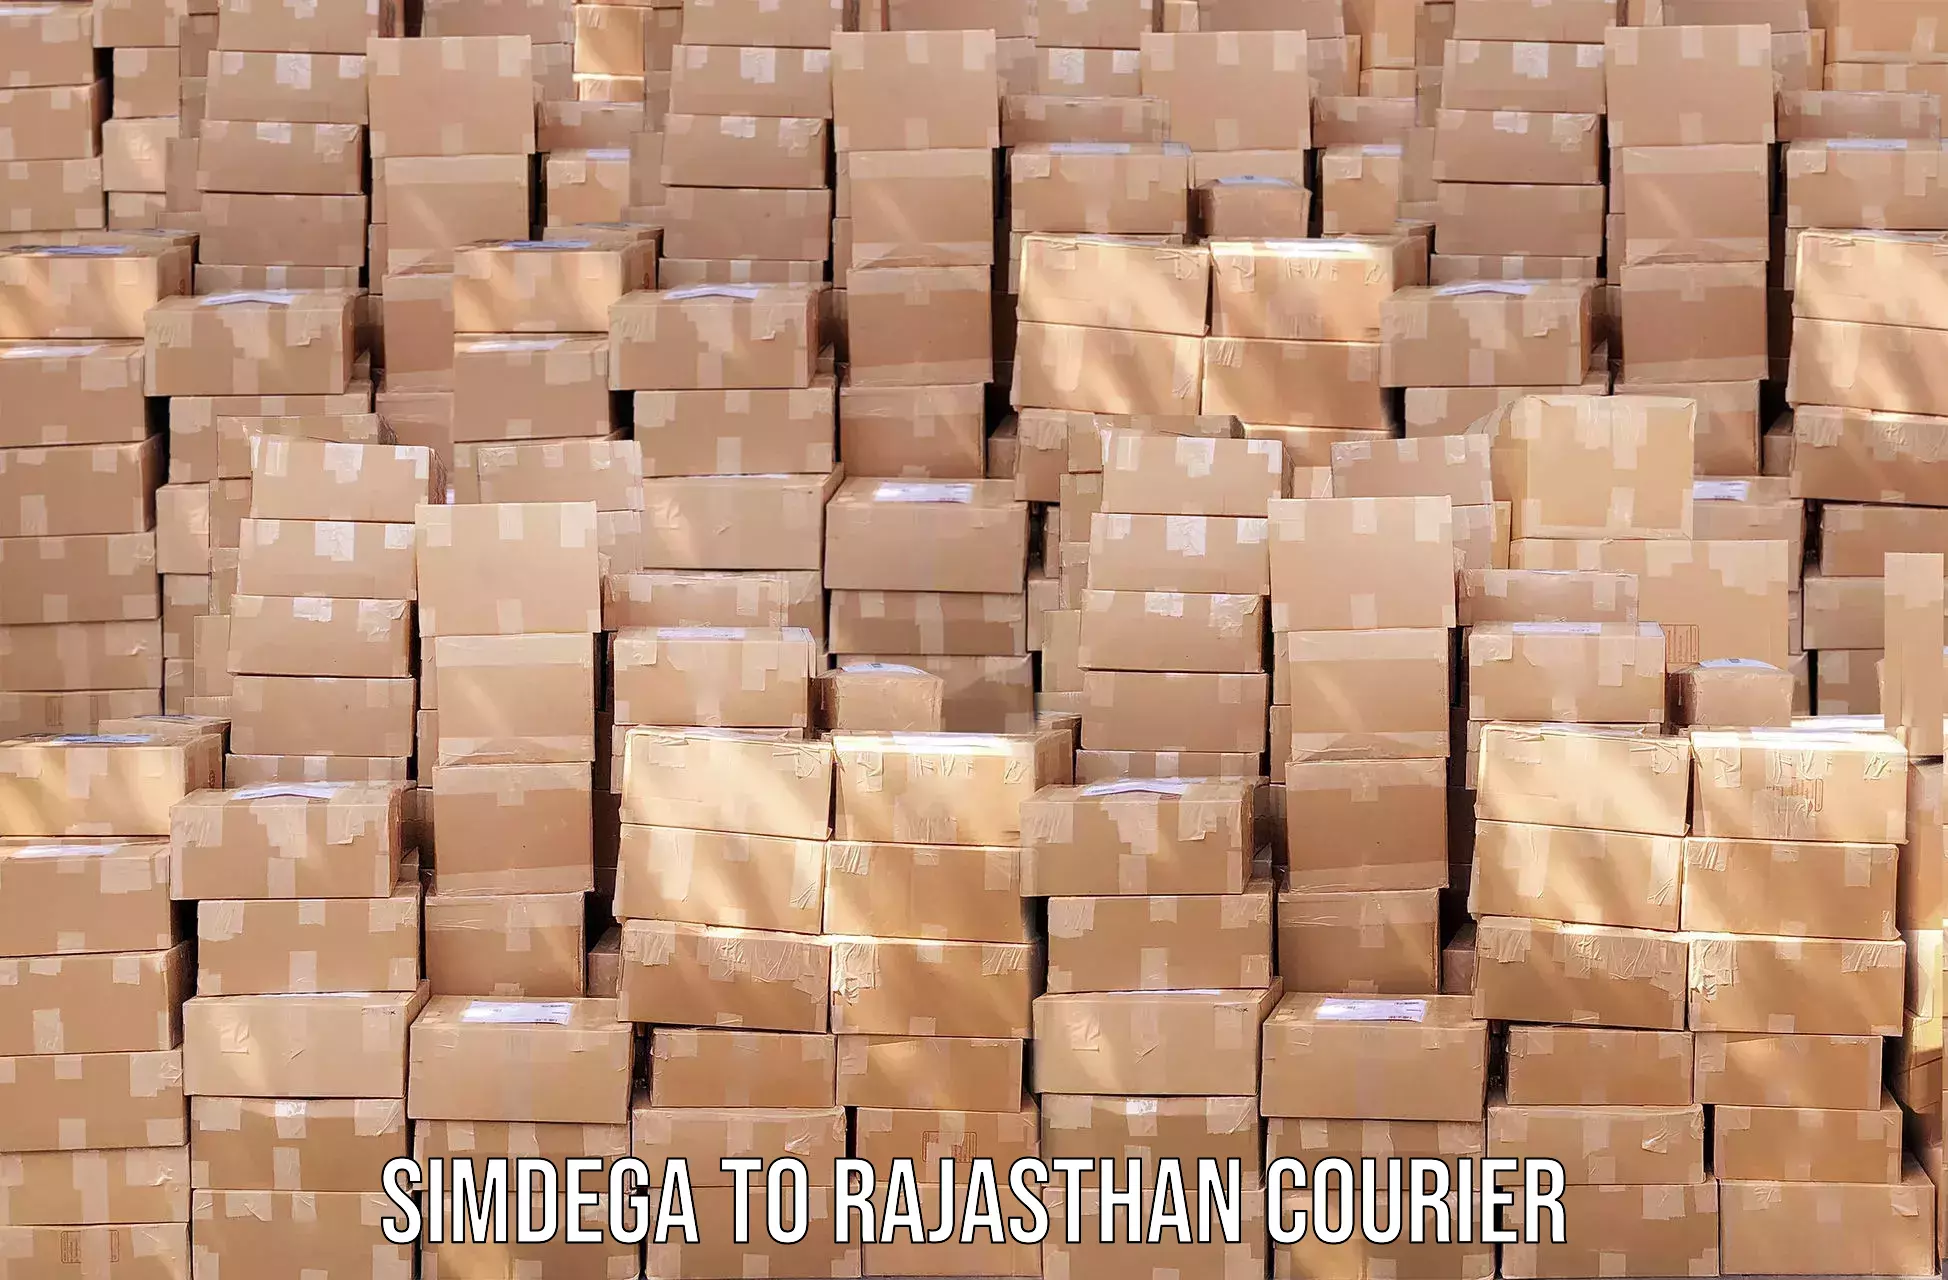 Parcel handling and care Simdega to Jaipur